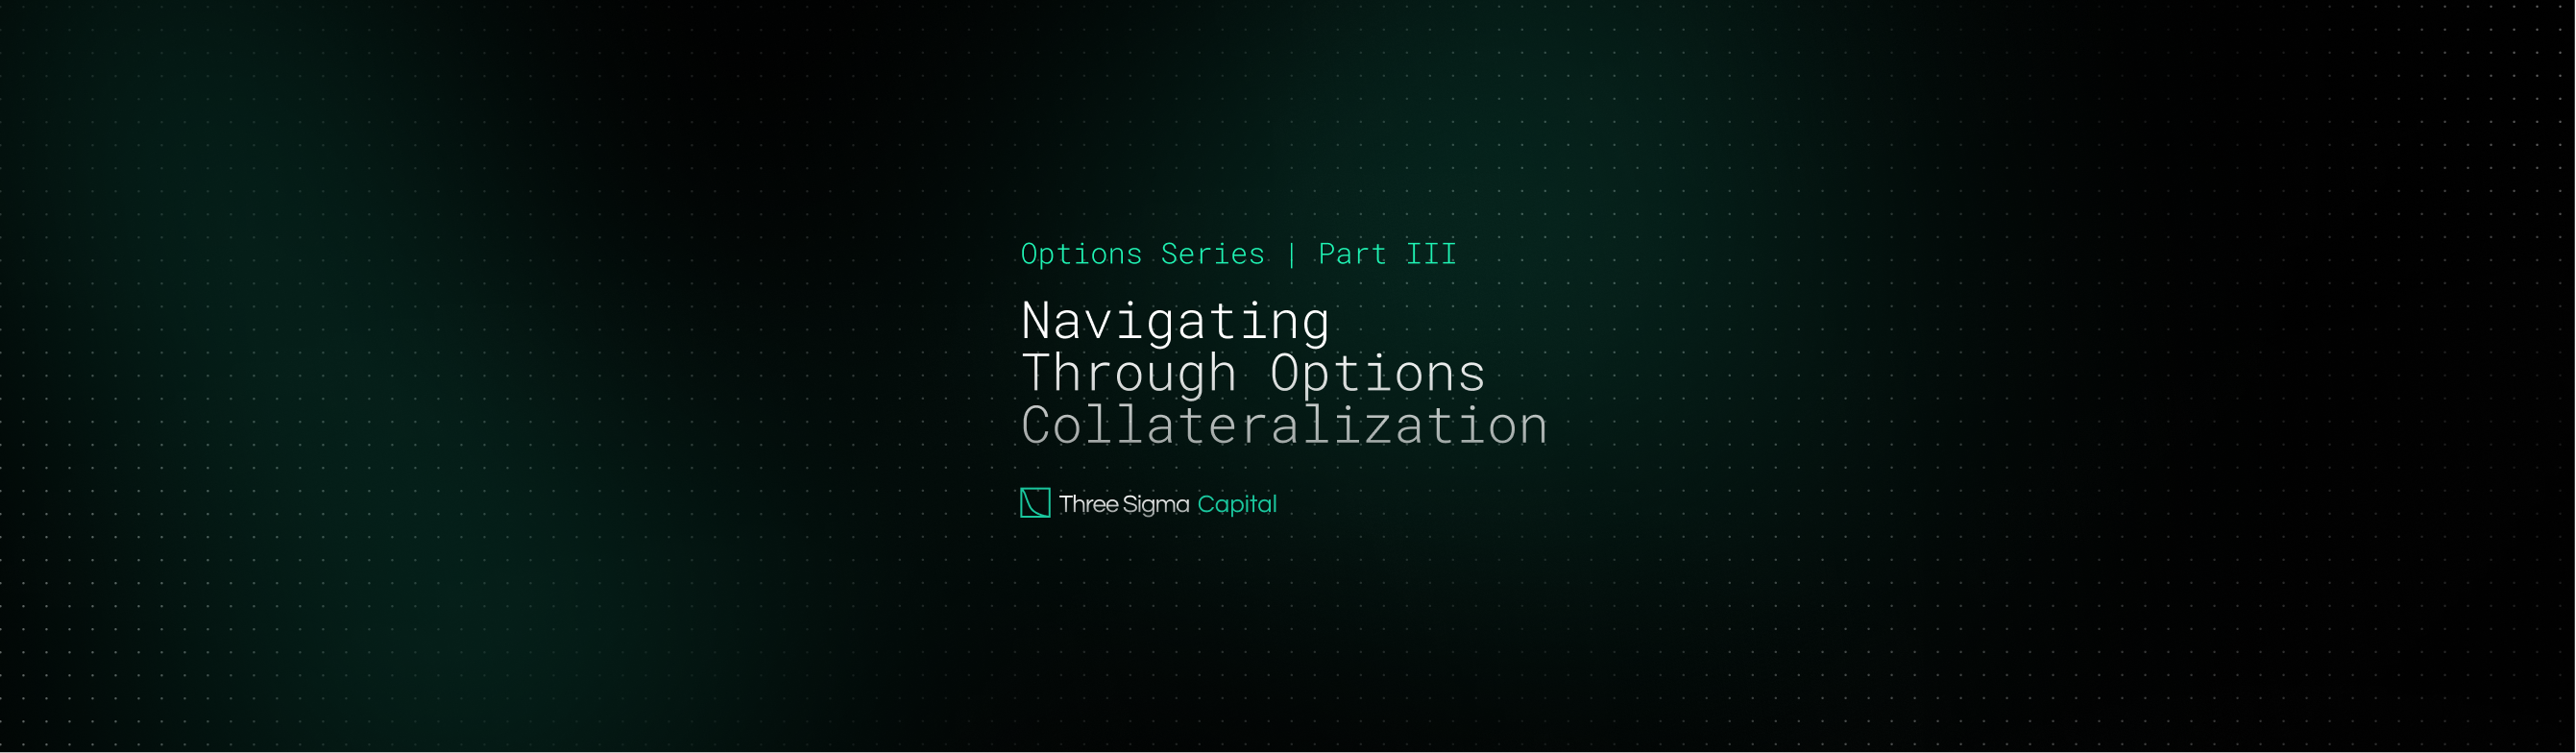 Cover Image for Options Series Part III - Navigating Through Options Collateralization